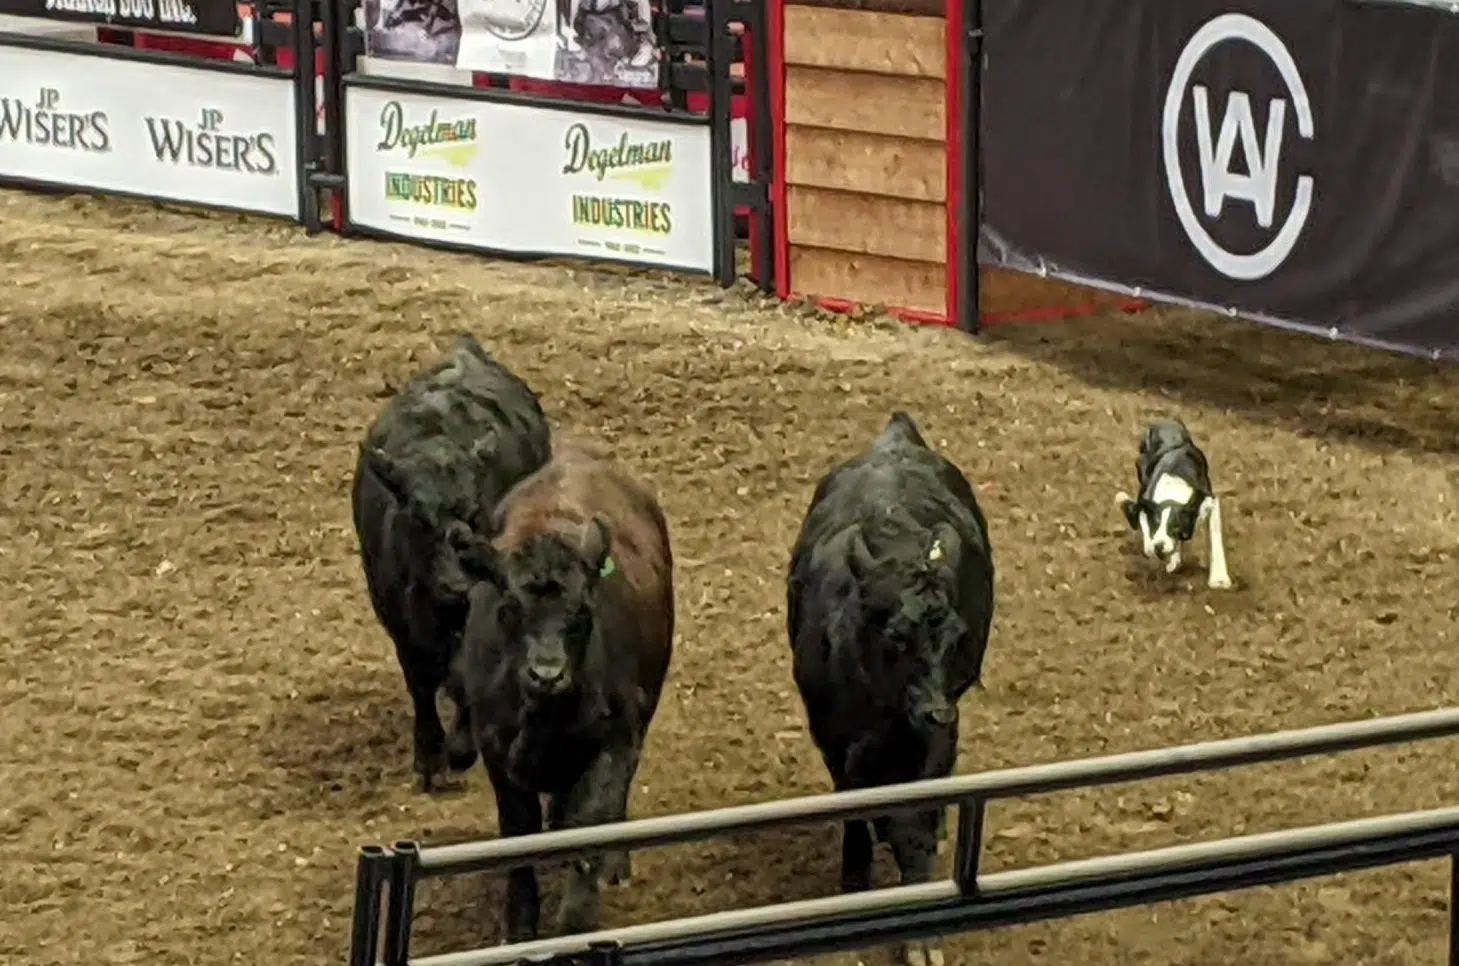 Agribition hosts open cattle dog competition for first time